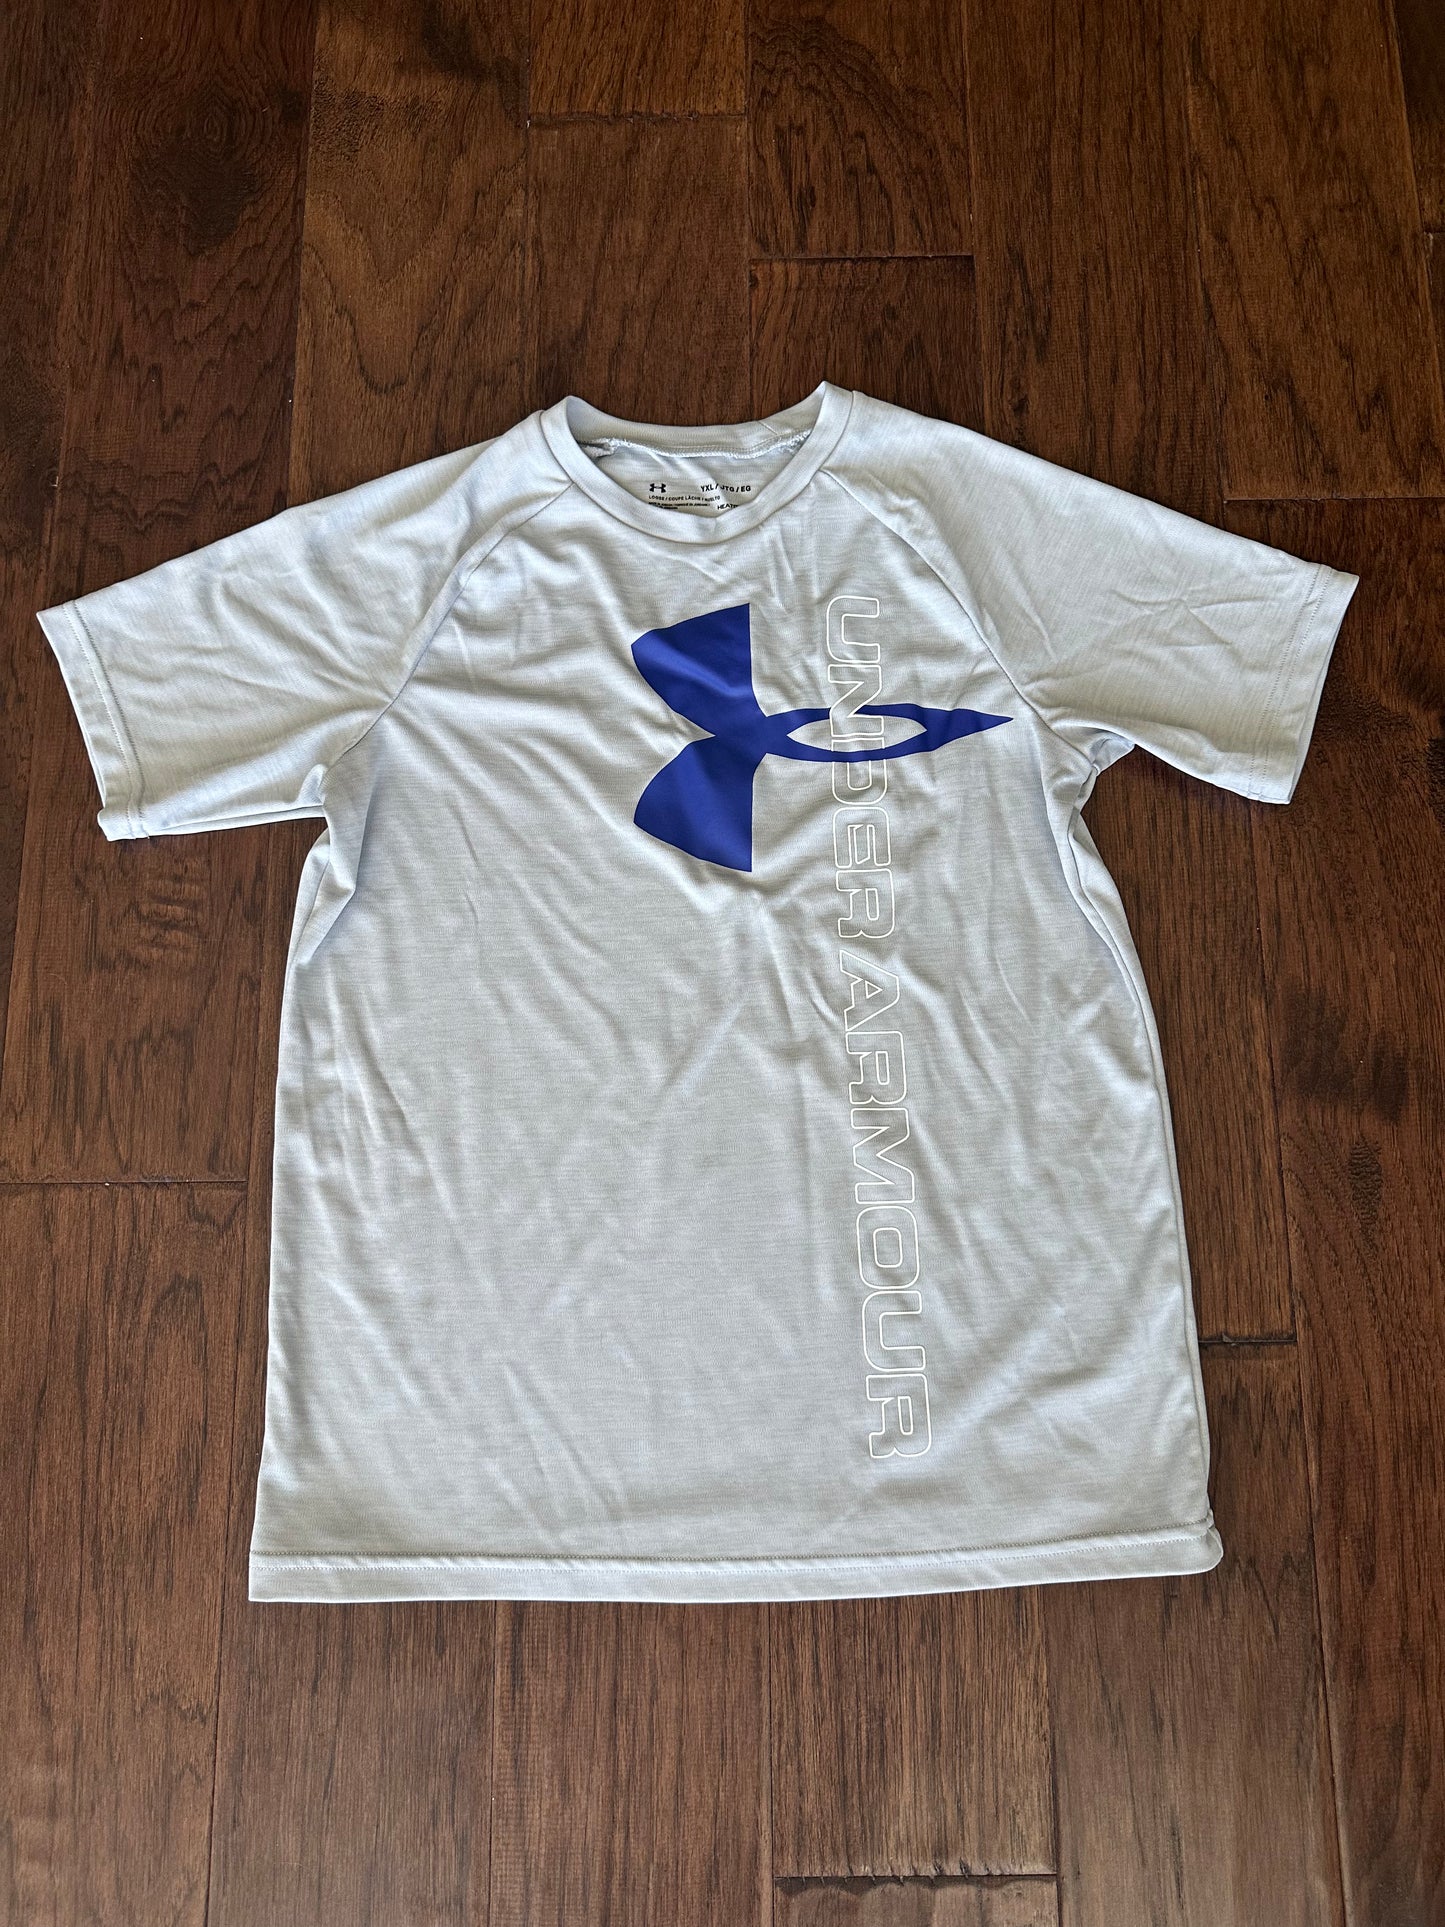 Under Armour - Youth XL